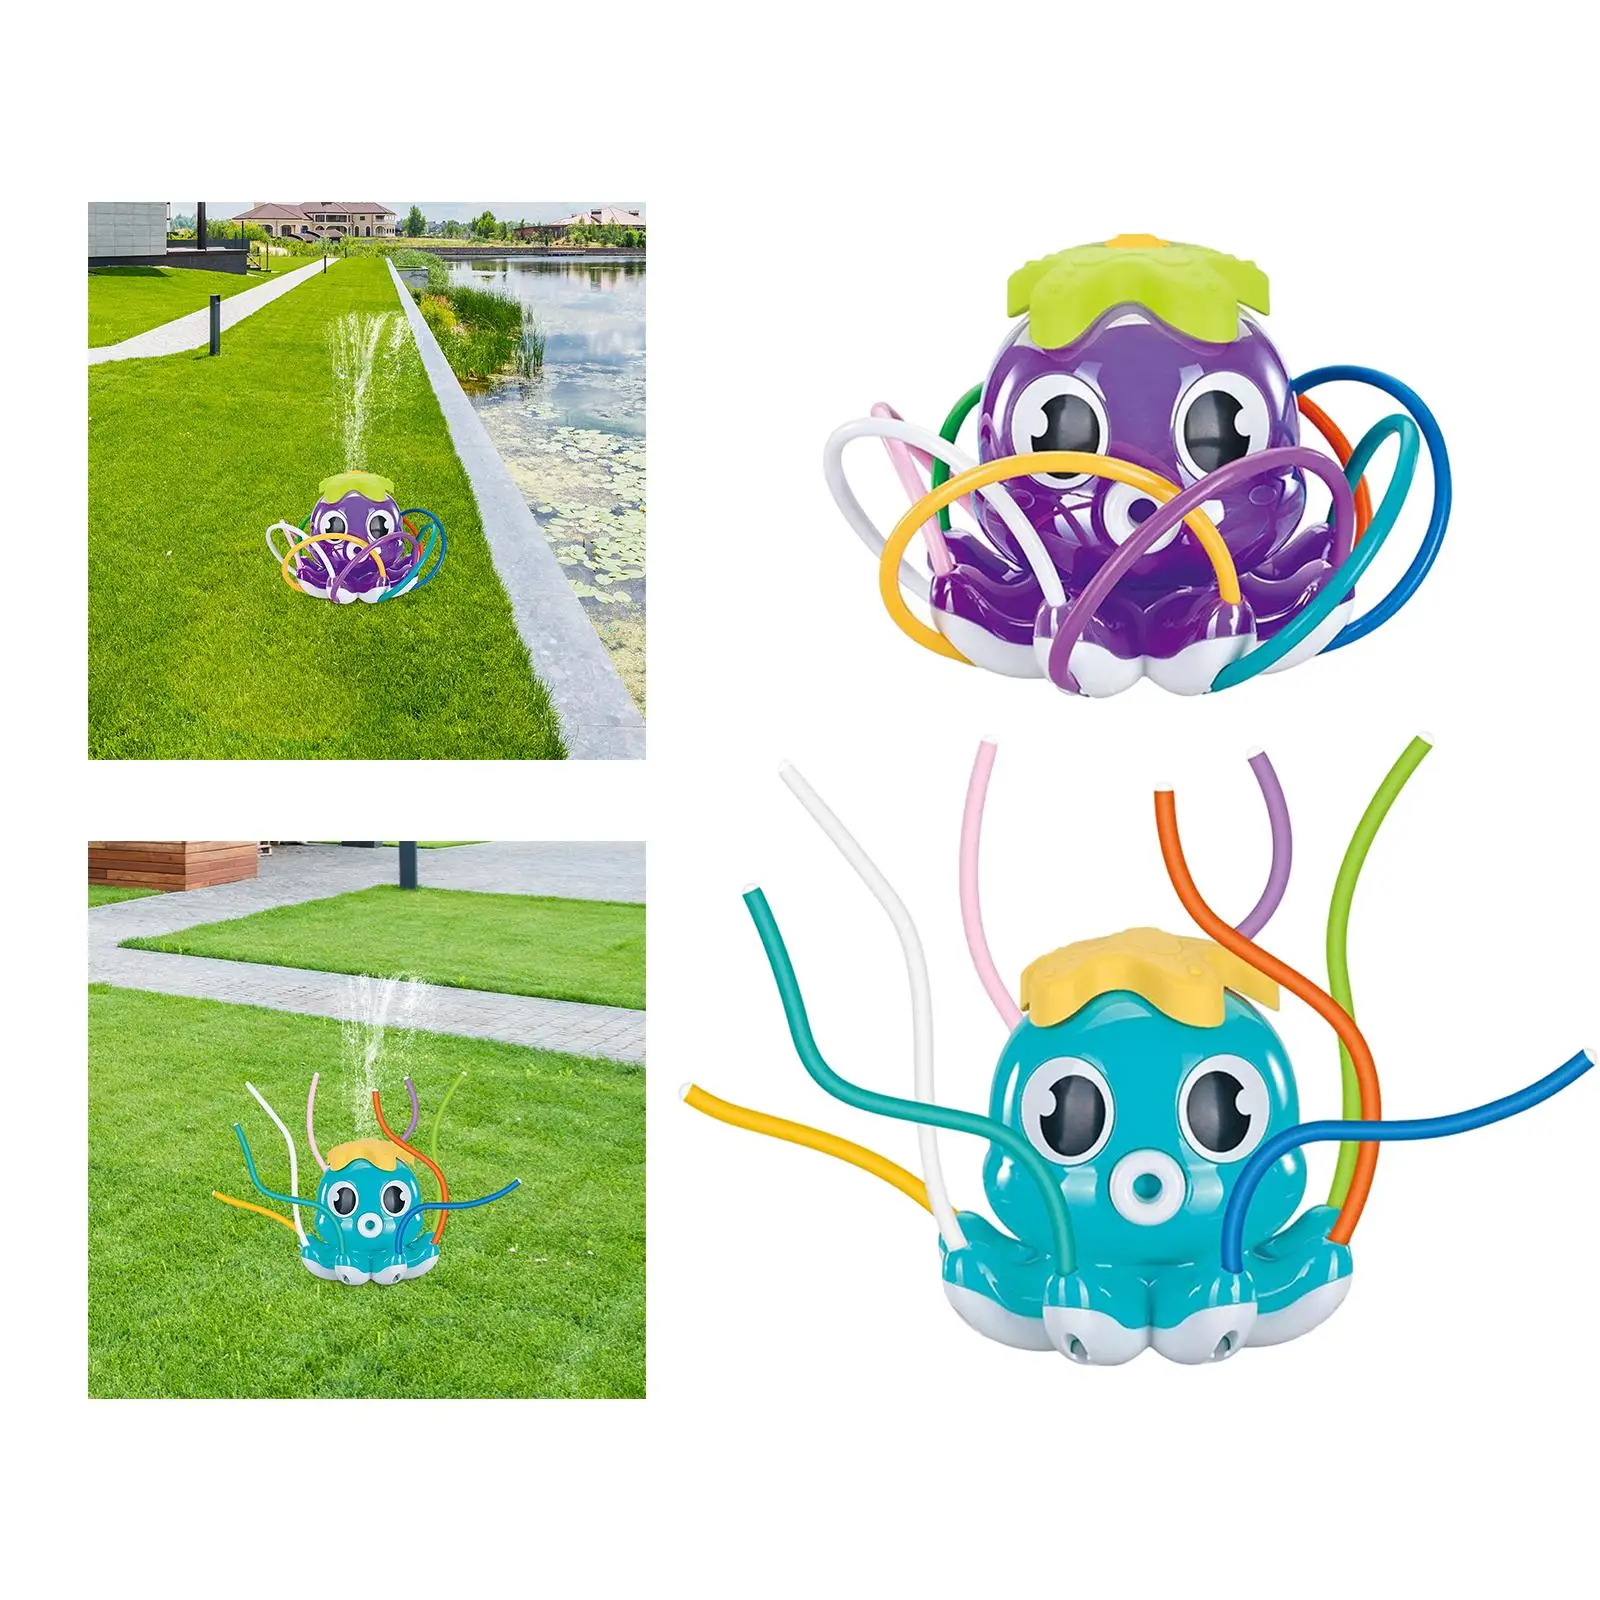 Octopus Water Garden Watering Toy Water Pressure Control for Pool Beach